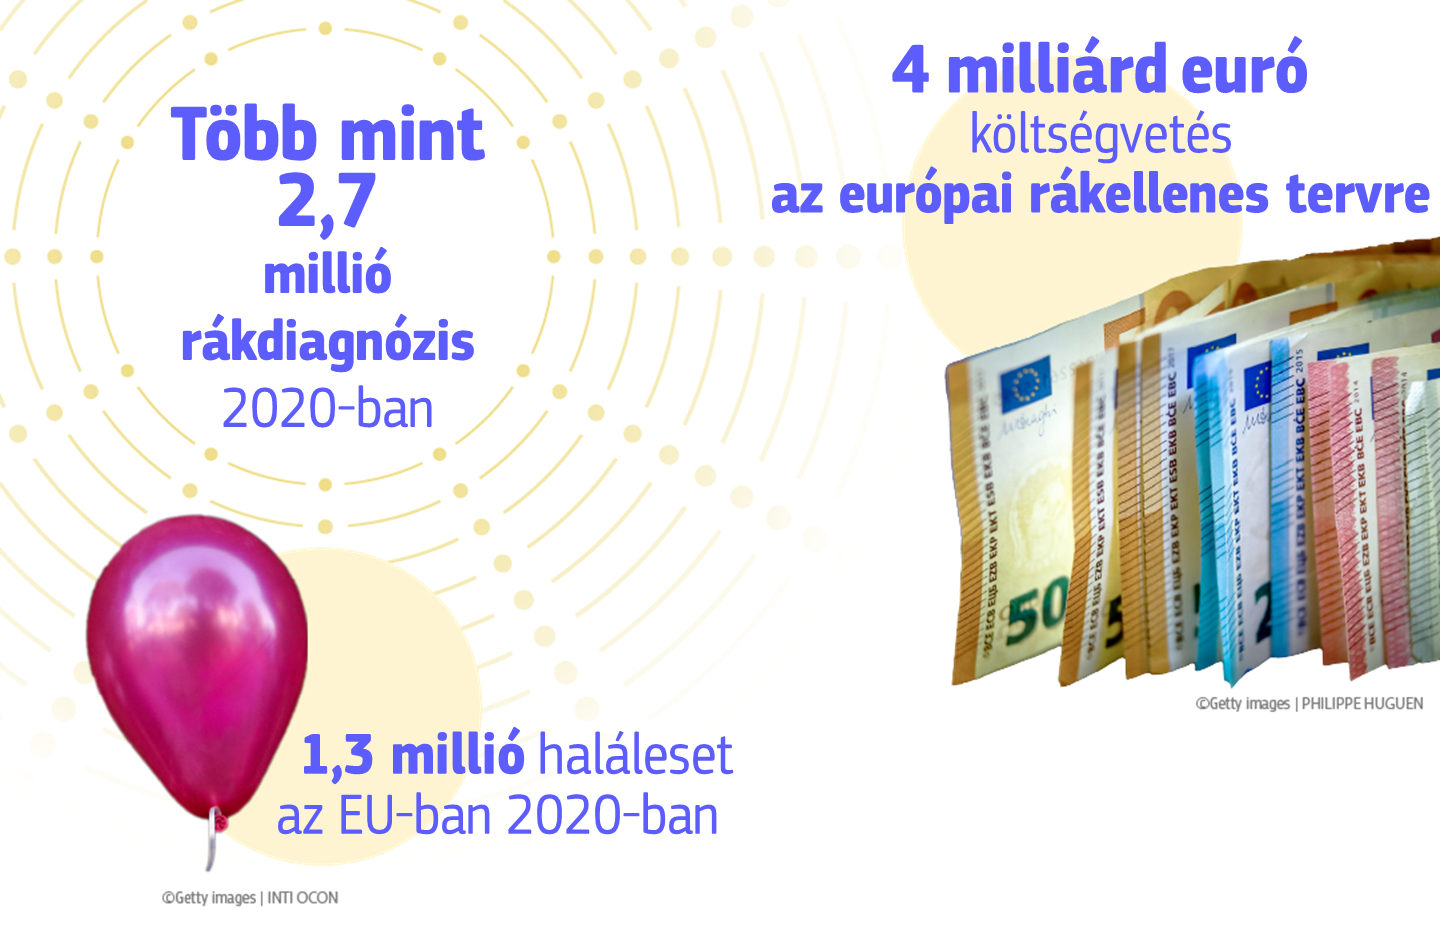 Infographic showing information on the EU's cancer plan